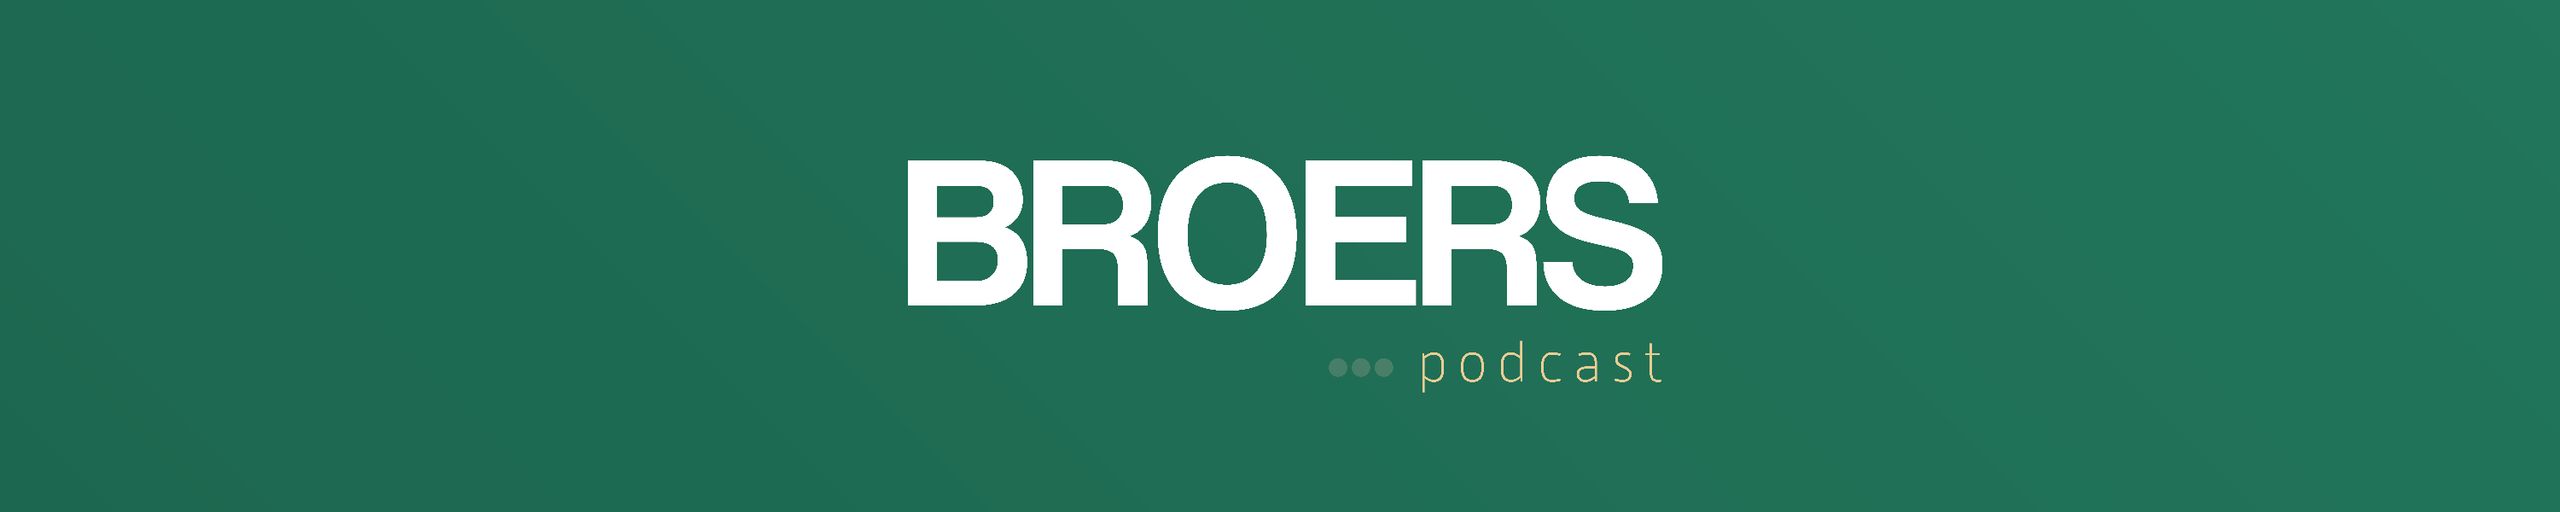 BROERS podcast